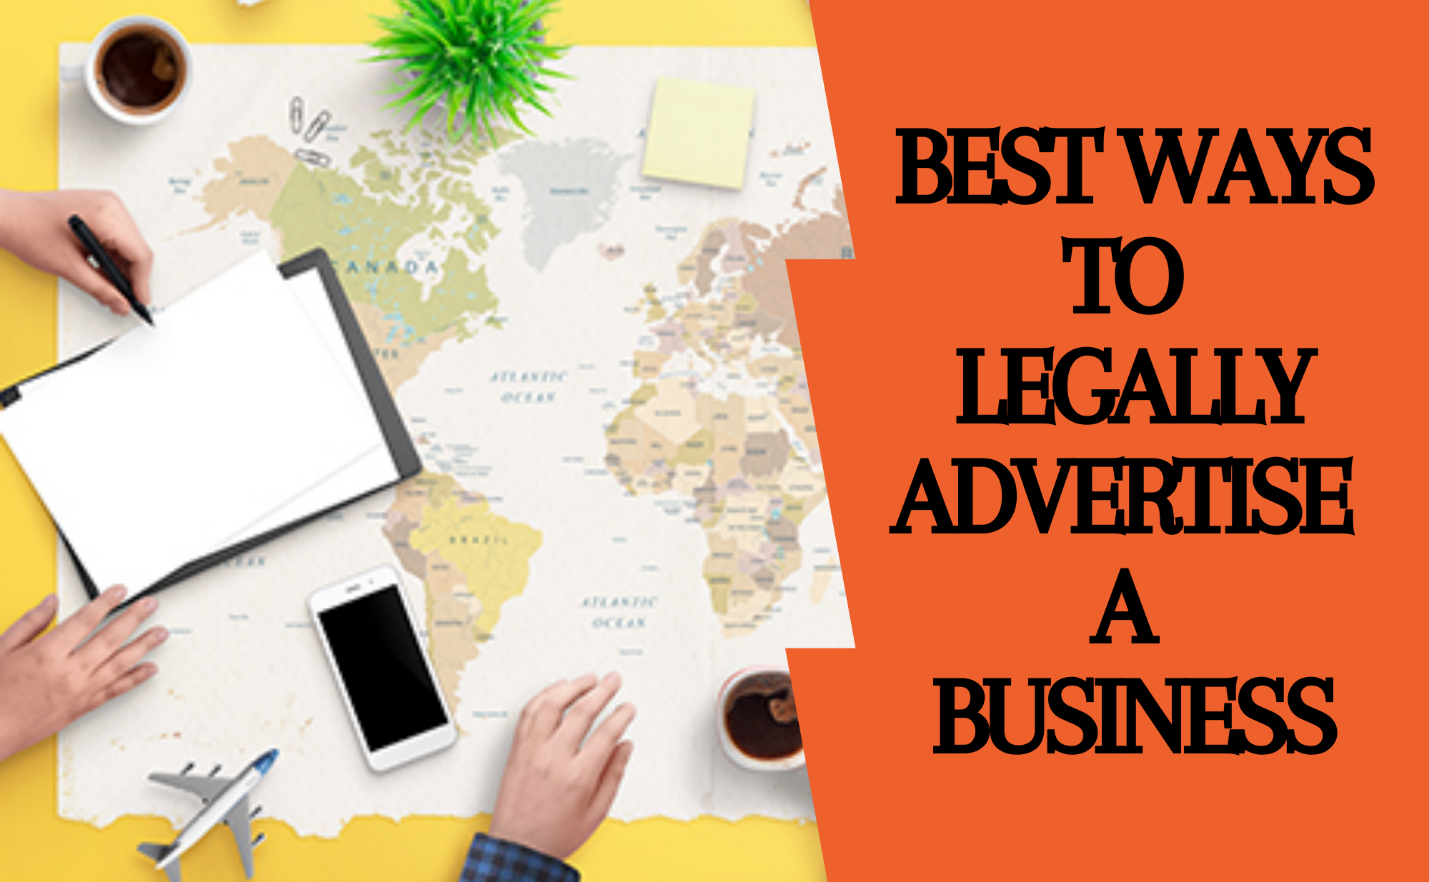 Best ways to Legally Advertise a Business